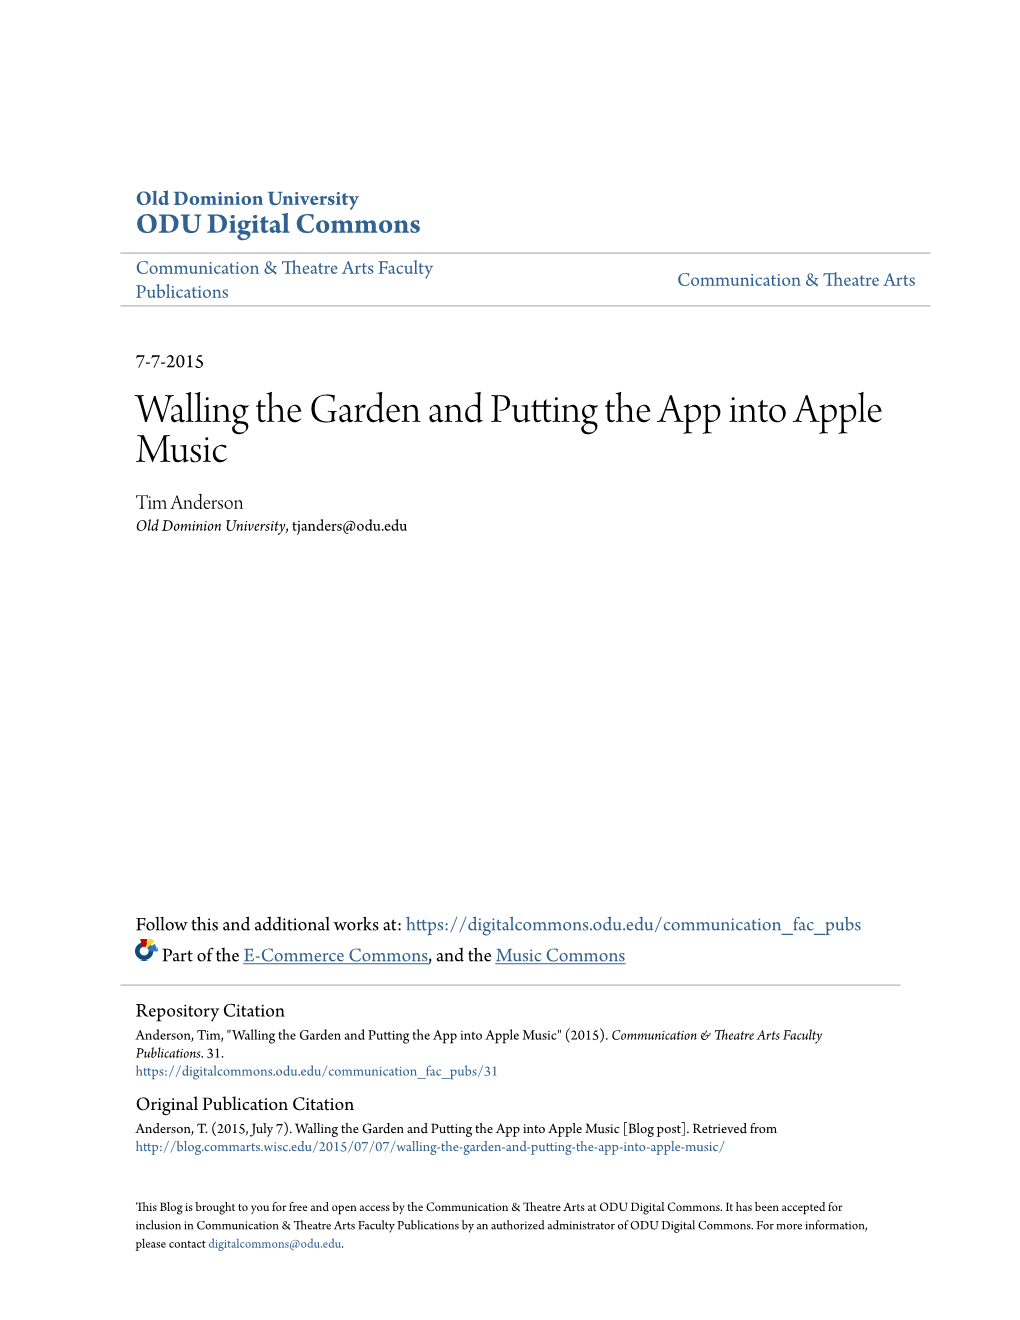 Walling the Garden and Putting the App Into Apple Music Tim Anderson Old Dominion University, Tjanders@Odu.Edu